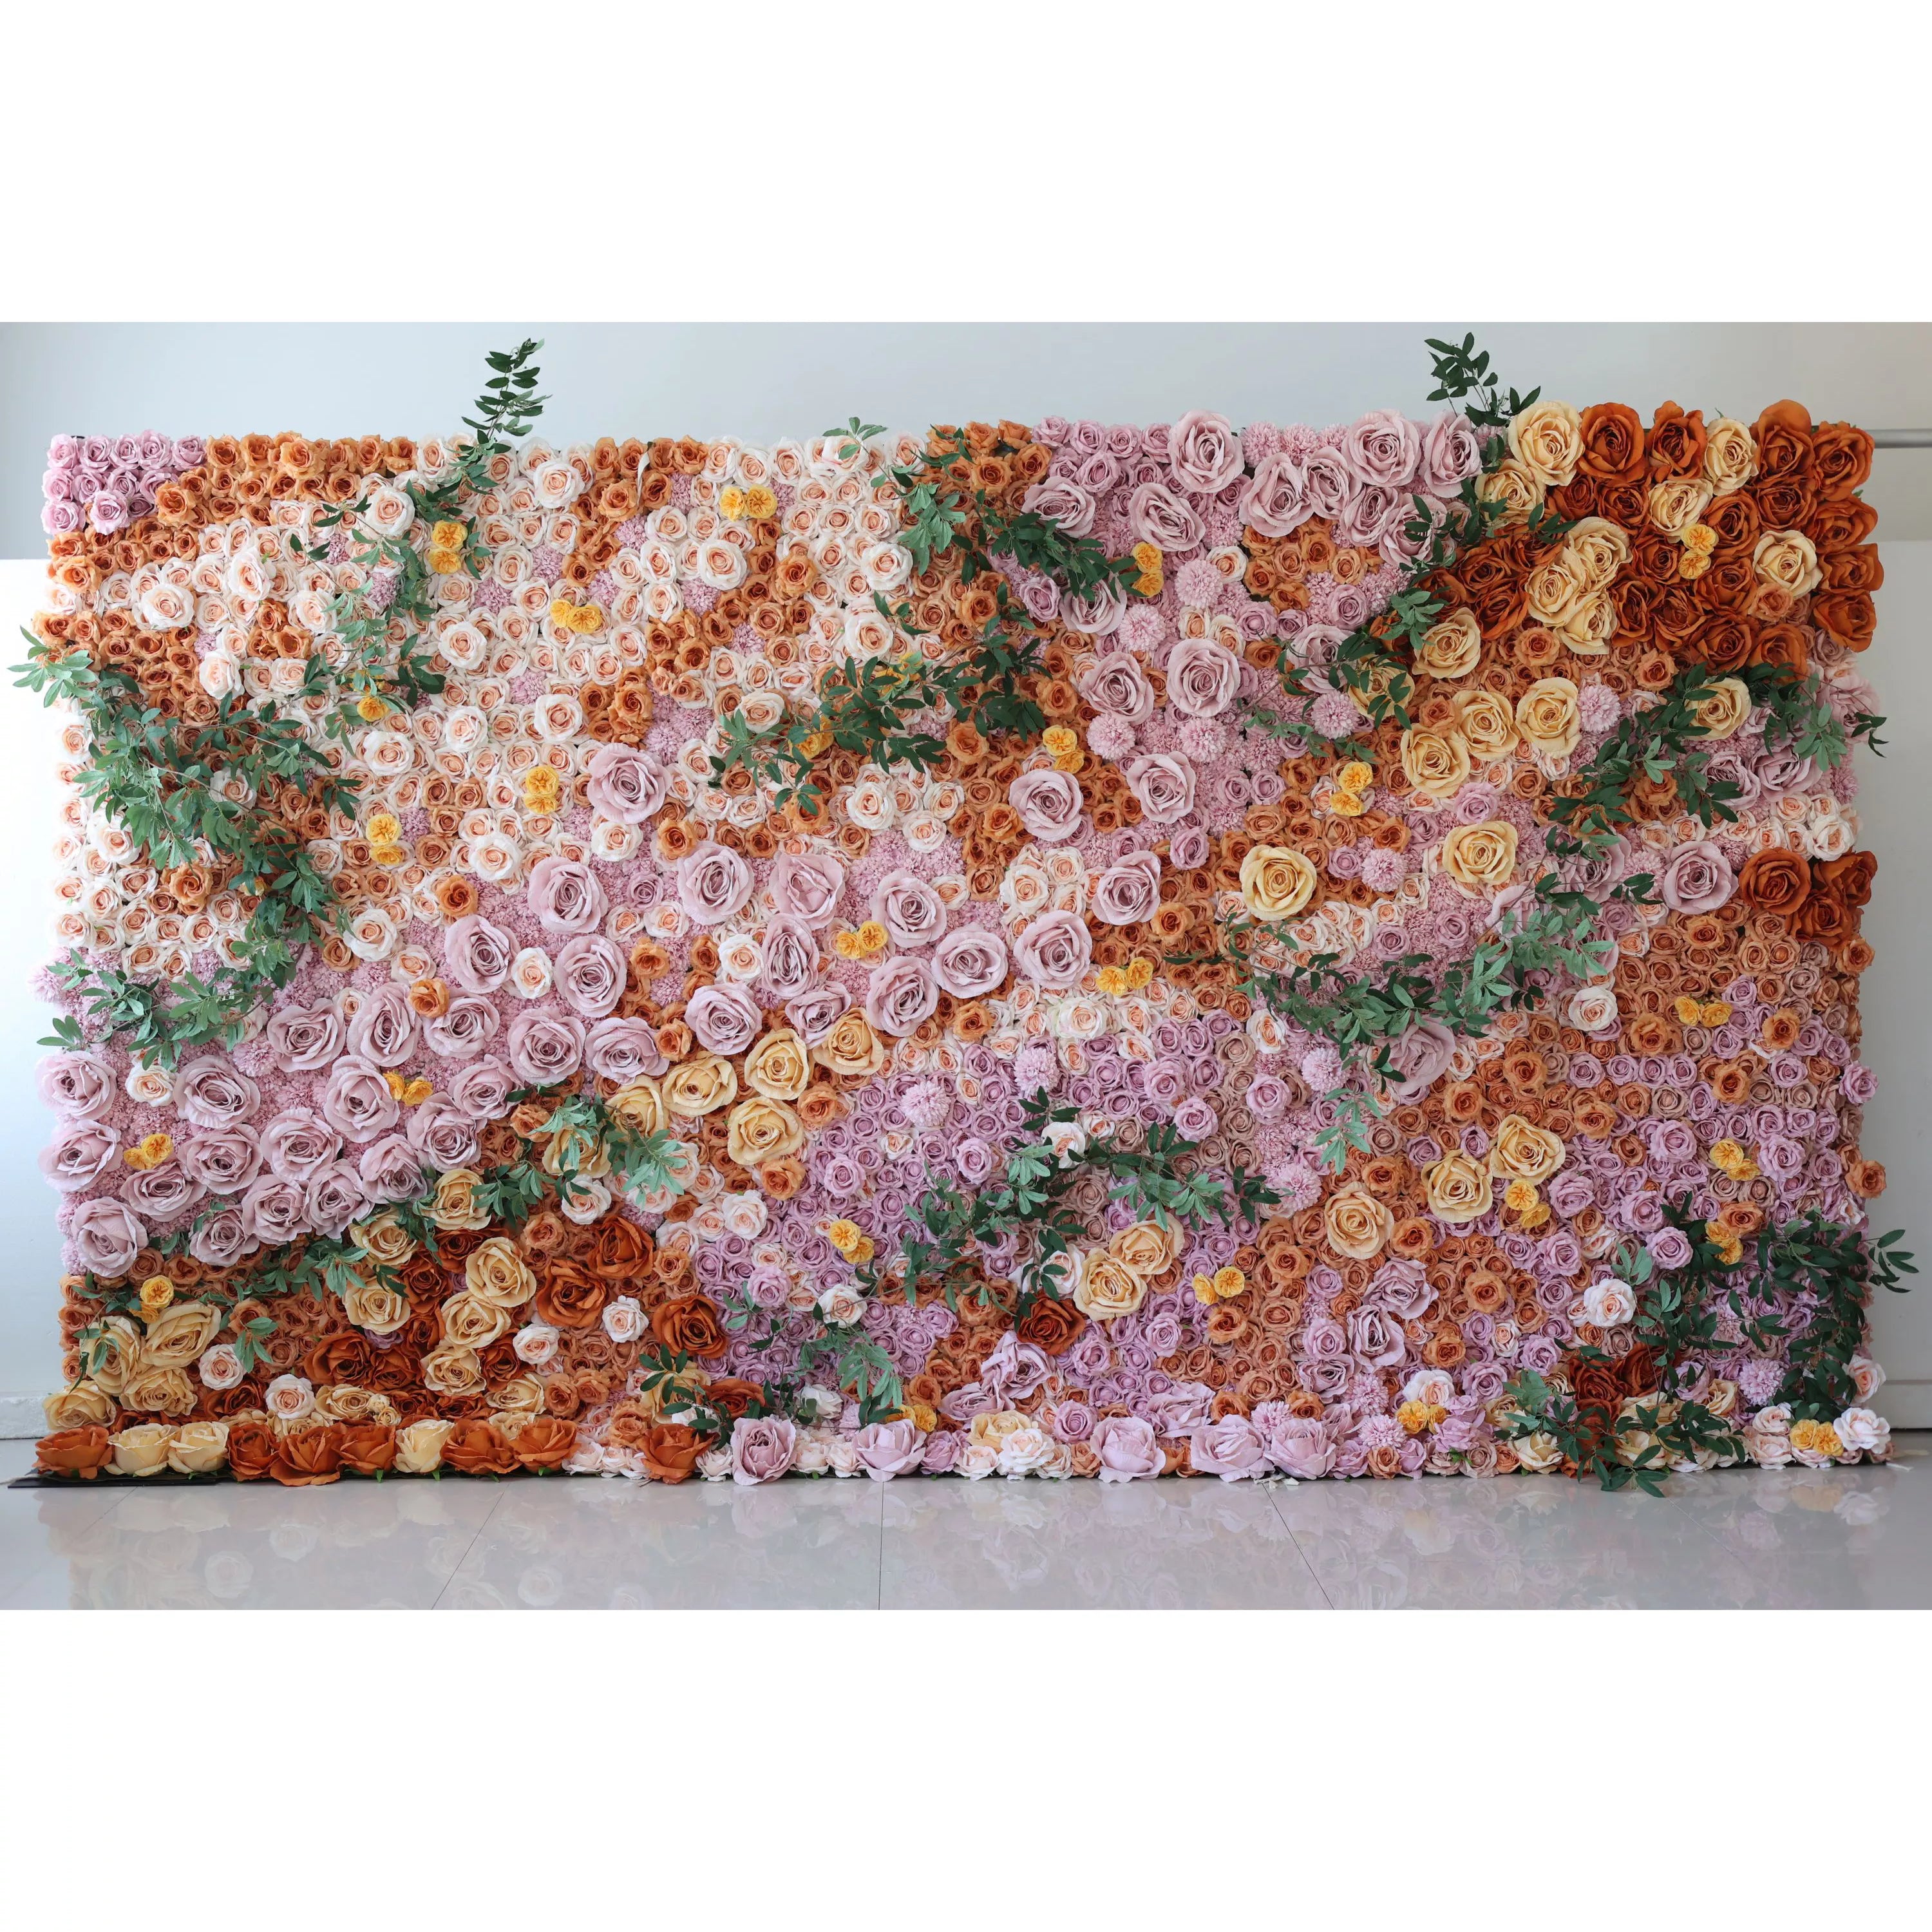 Enhance your space with our lush pink floral wall, boasting a rich blend of roses in warm hues. Ideal for spa settings or events, it offers a touch of elegance and nature-inspired tranquility. A must-have backdrop for any luxurious setting.